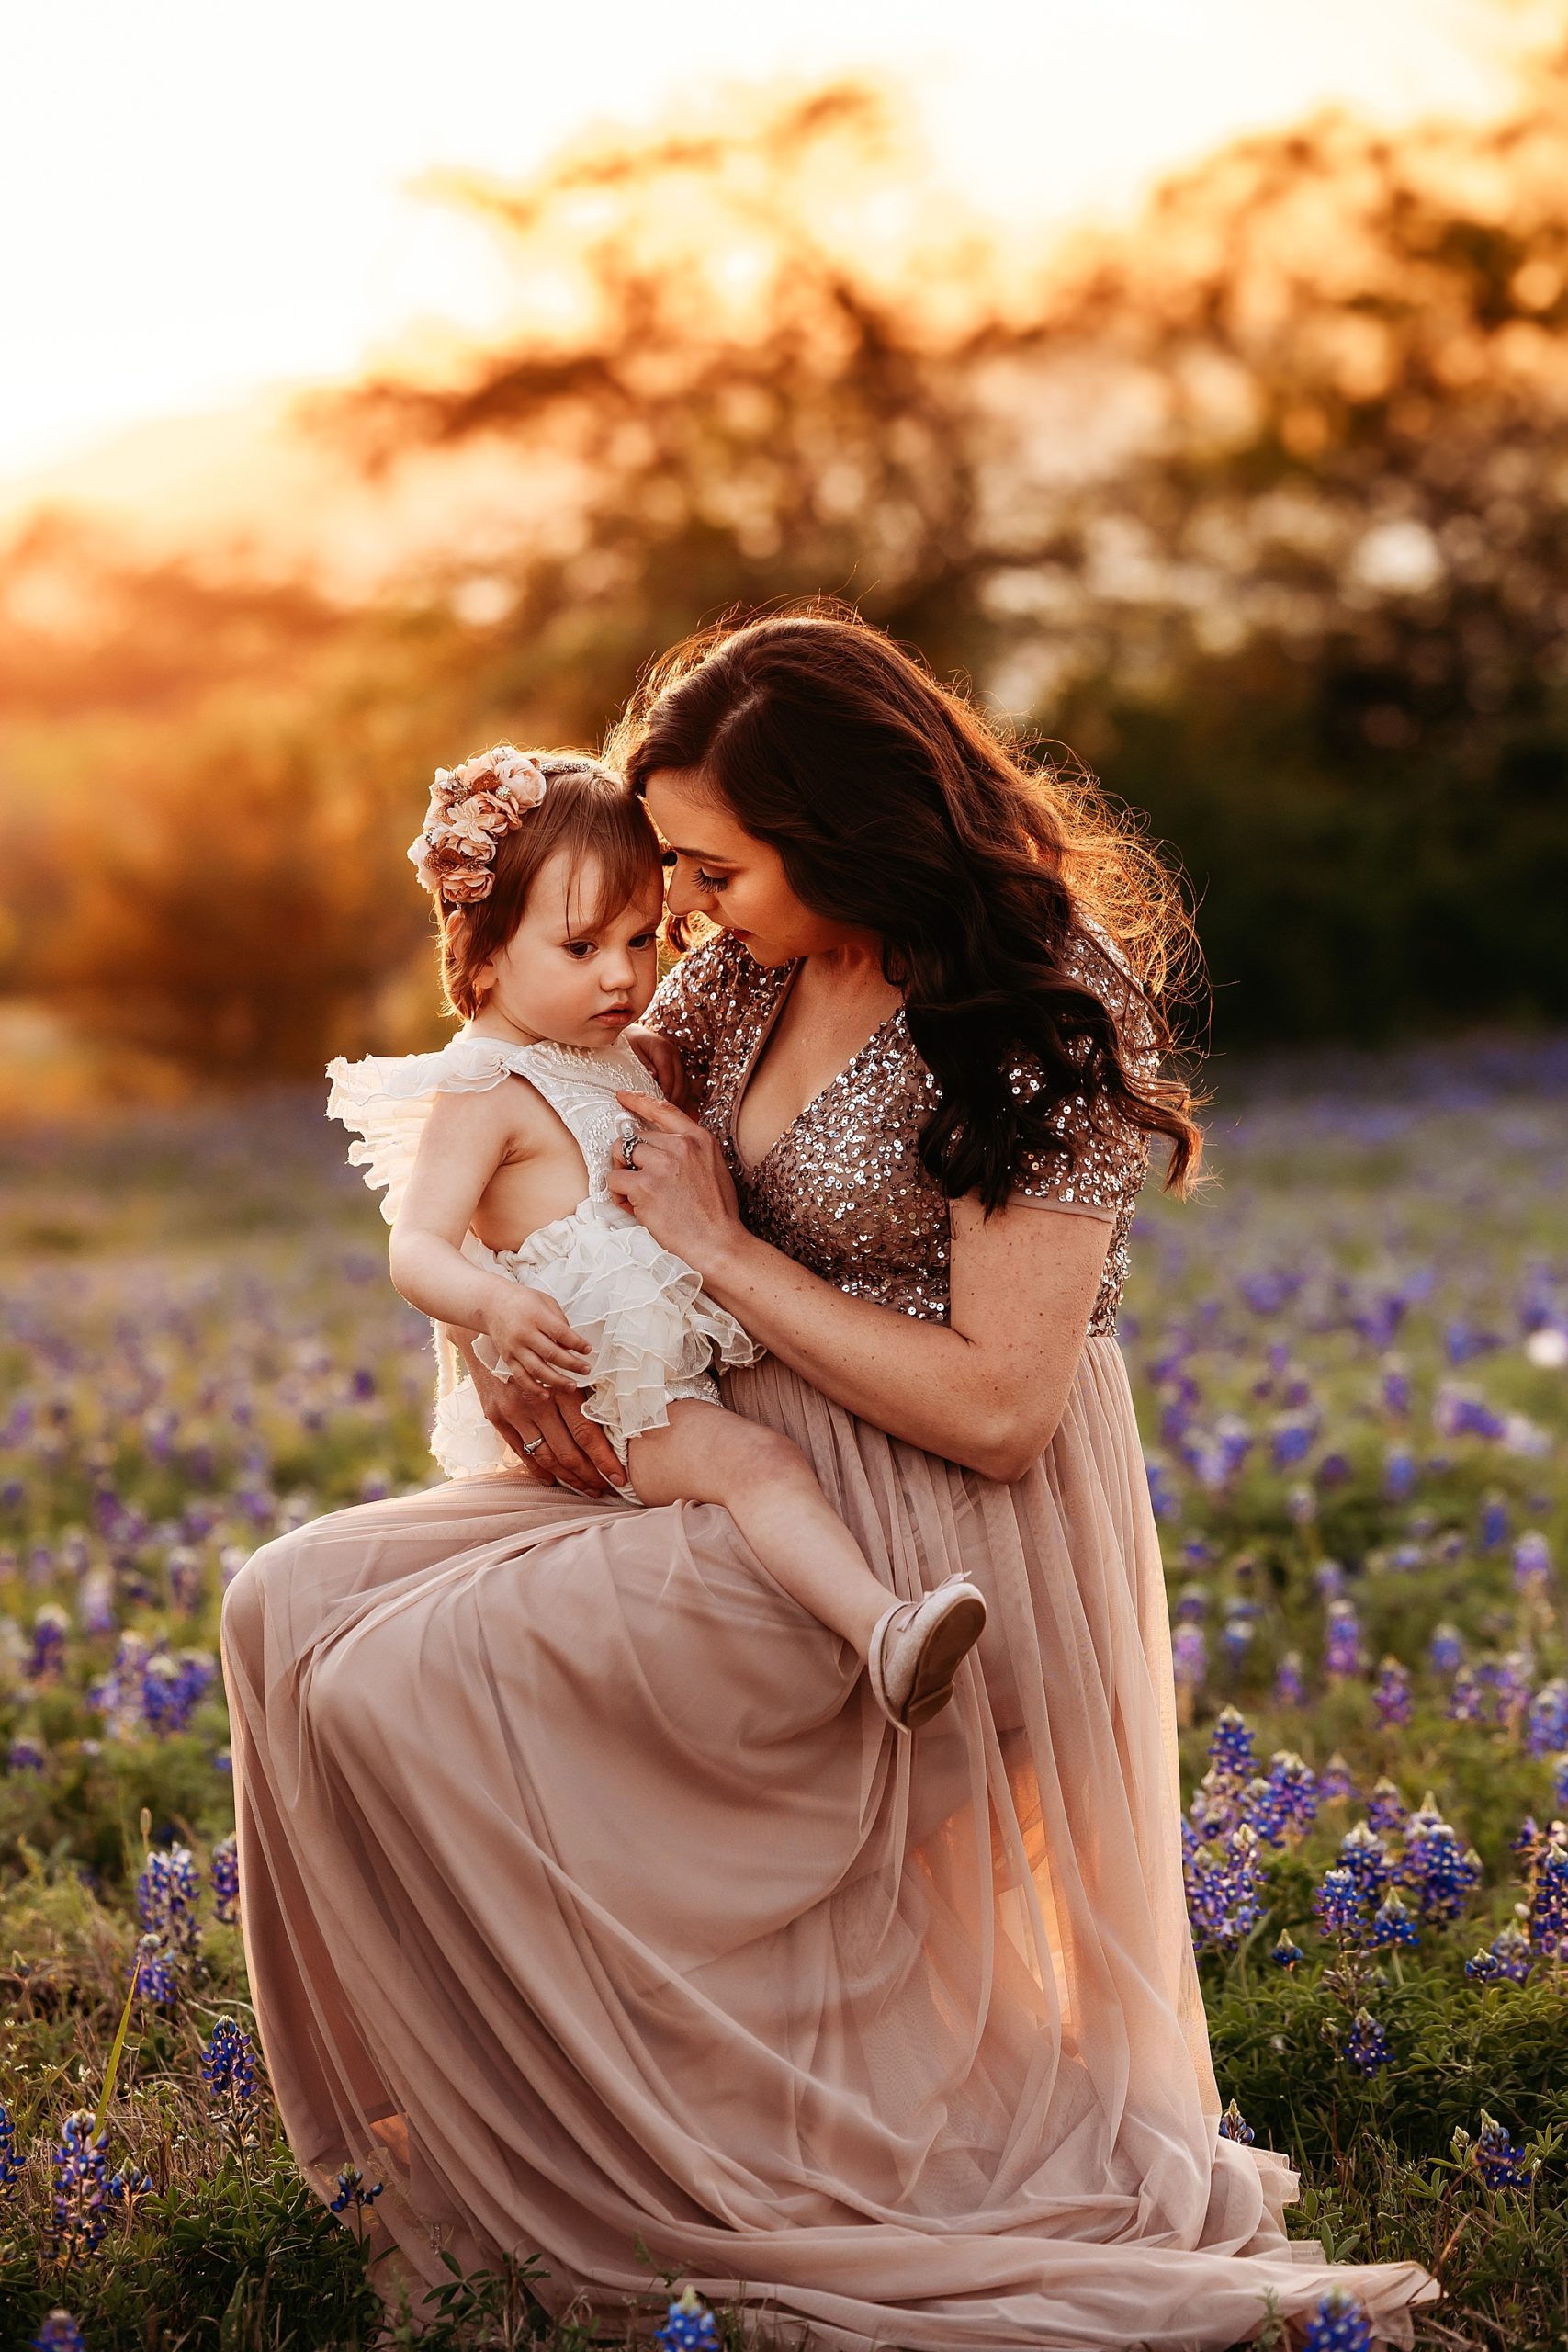 25 Beautiful Family Portrait Photography Ideas and Poses